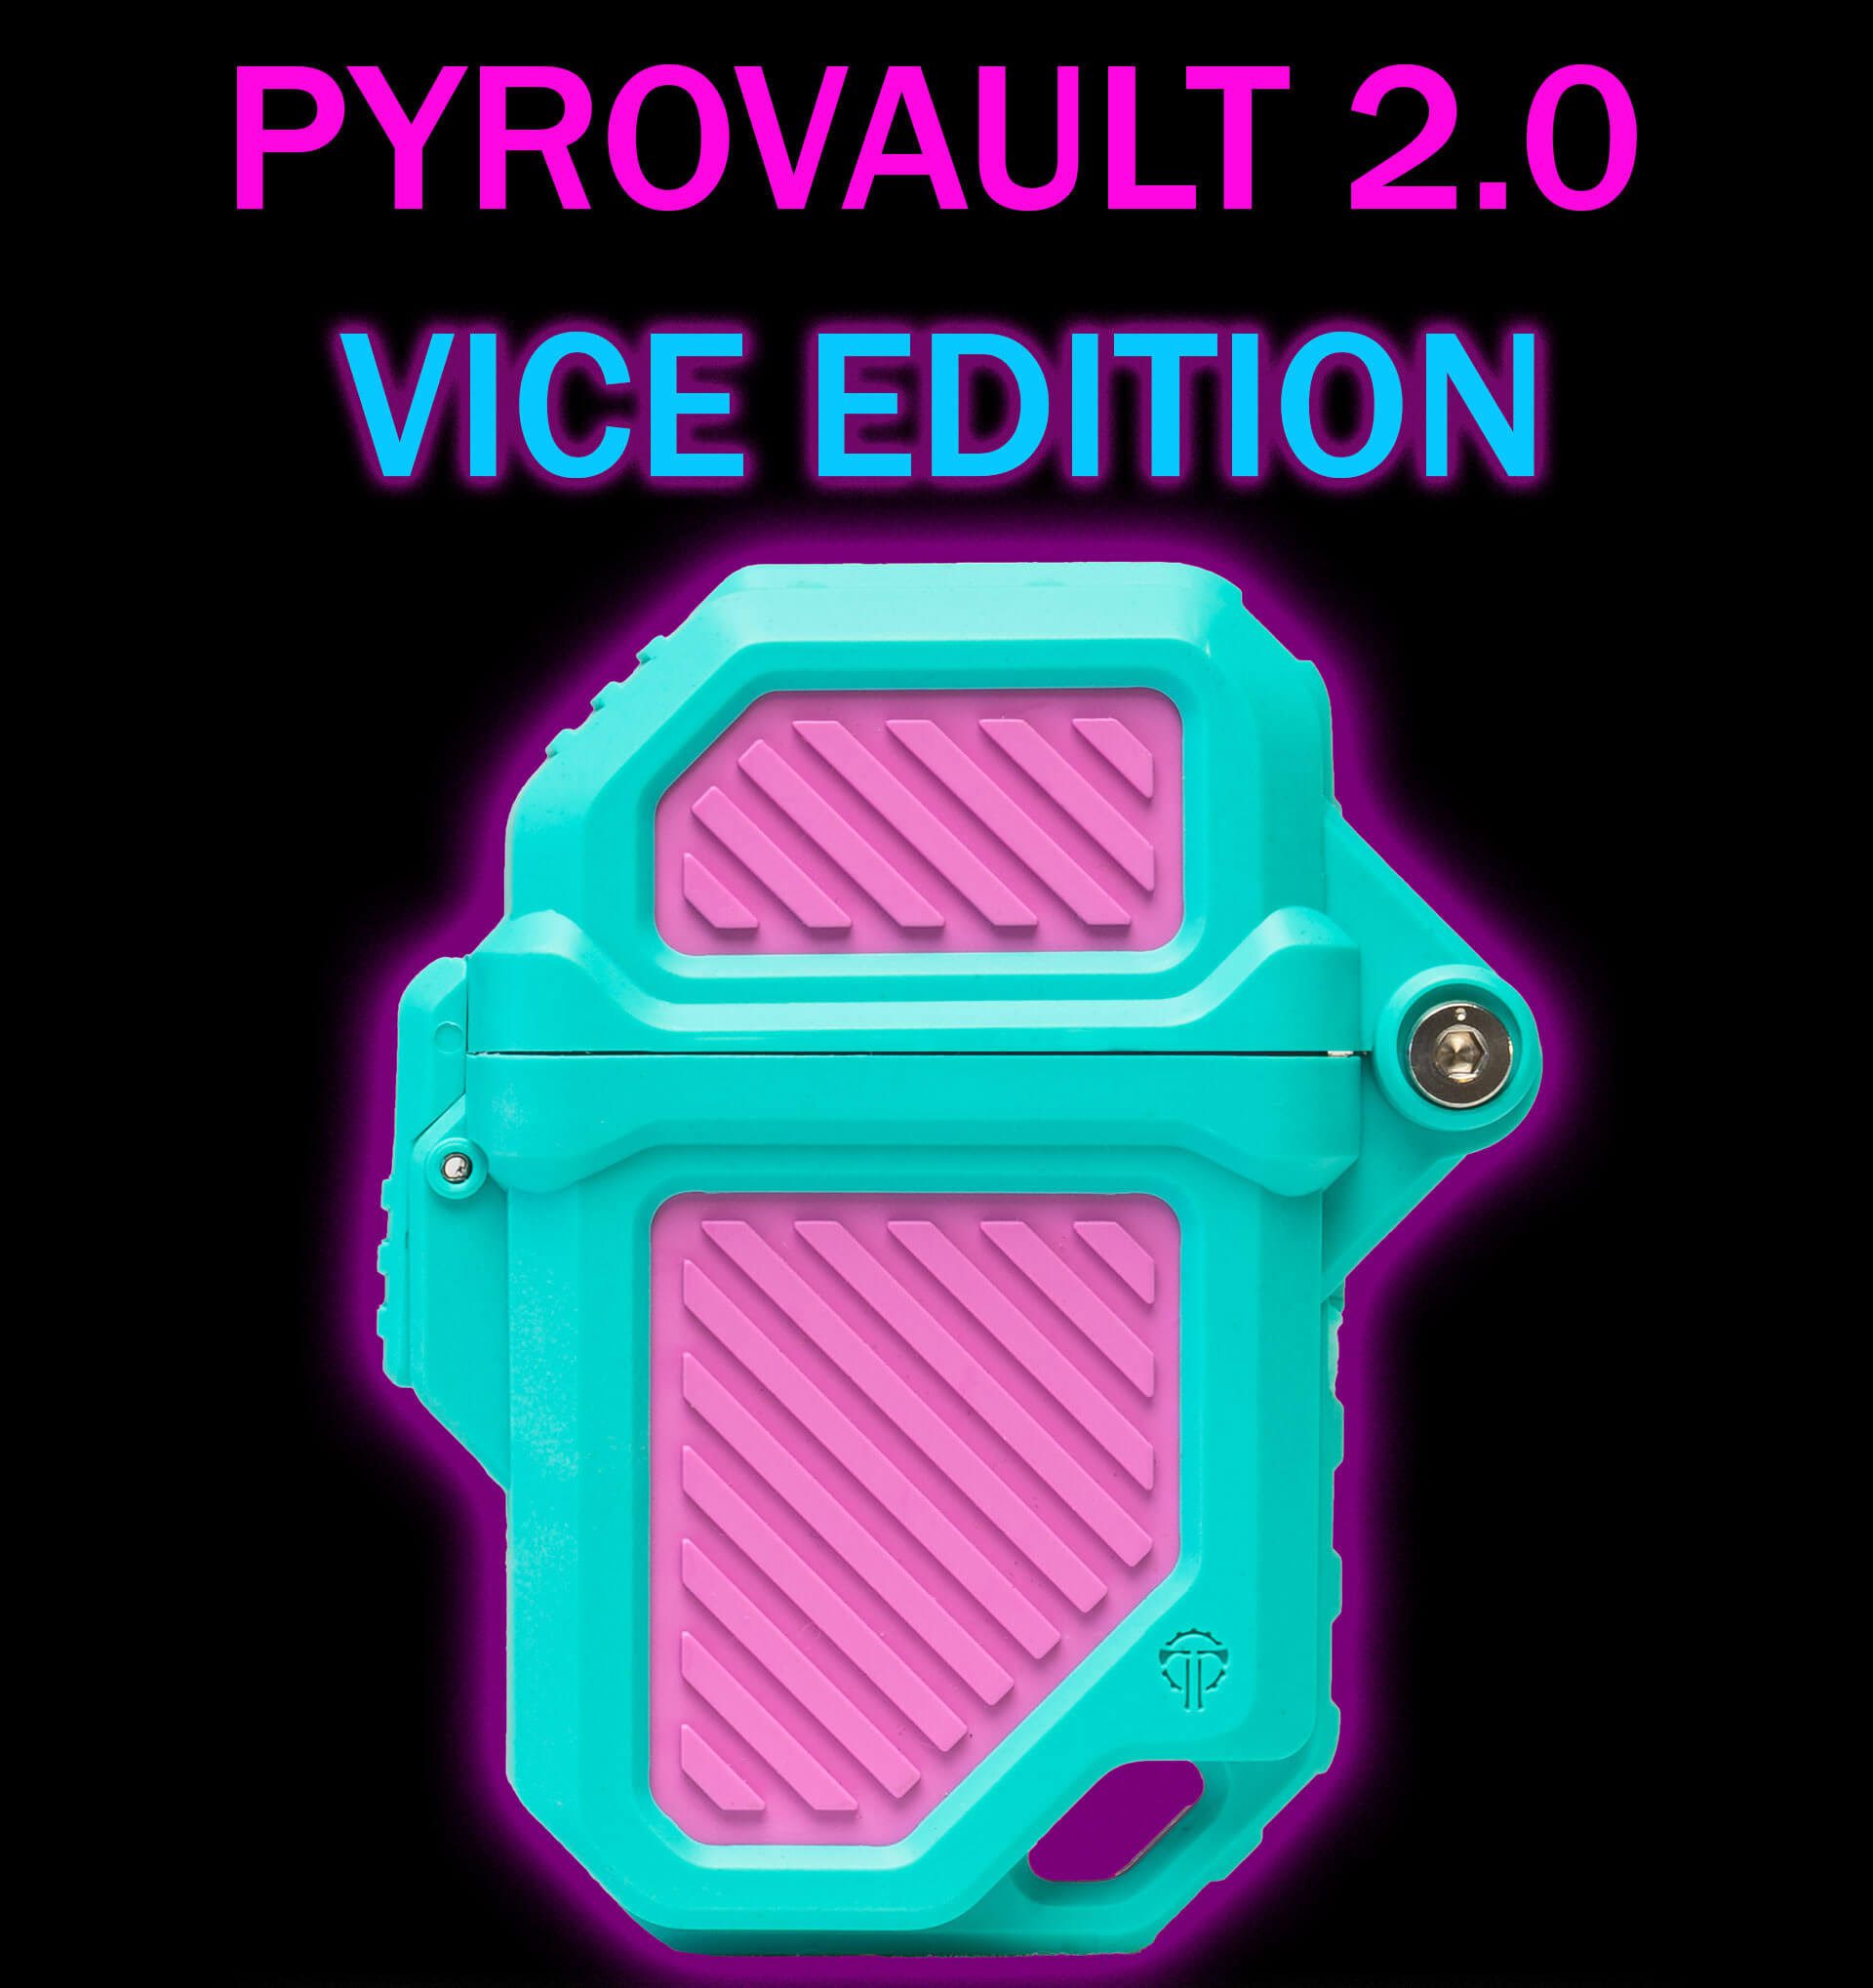 PyroVault 2.0 Lighter Armor Vice Edition in cyan and magenta